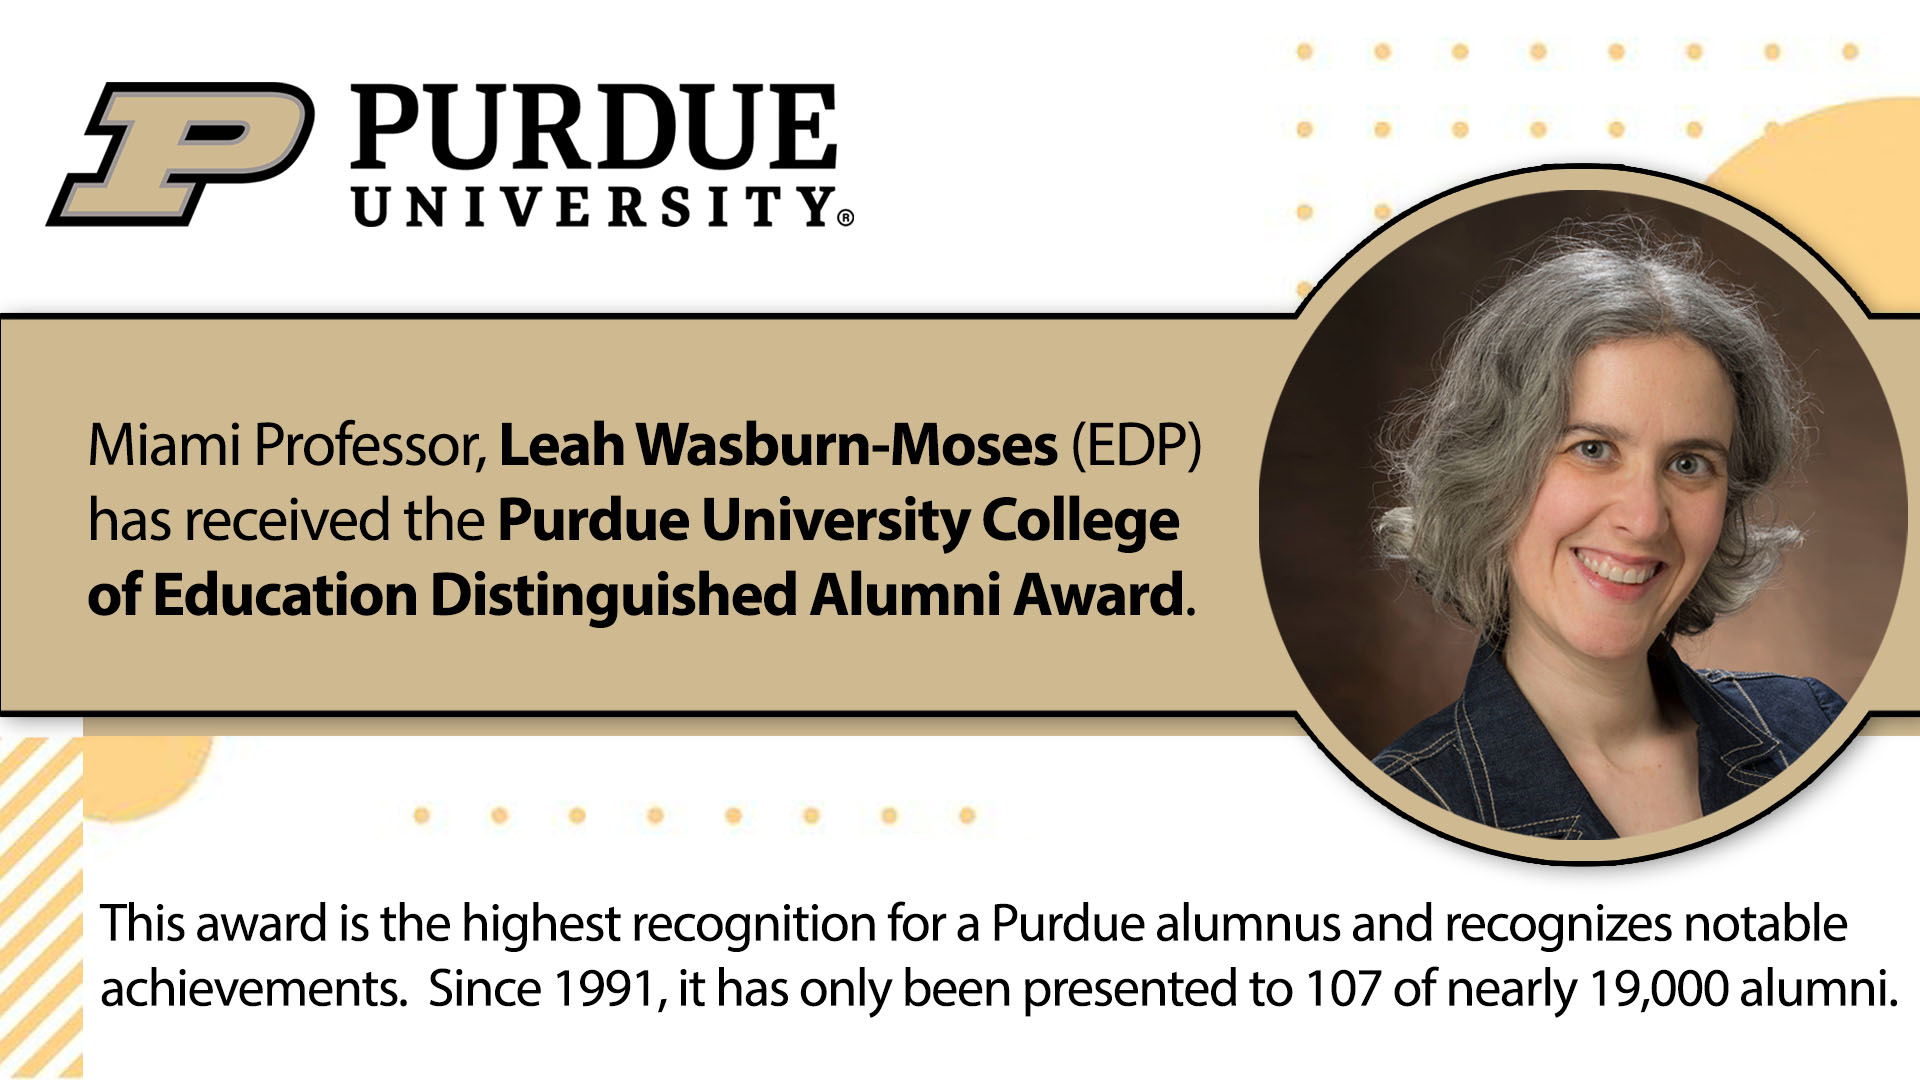 Dr. Leah Wasburn-Moses has received the Purdue University College of Education Distinguished Alumni Award